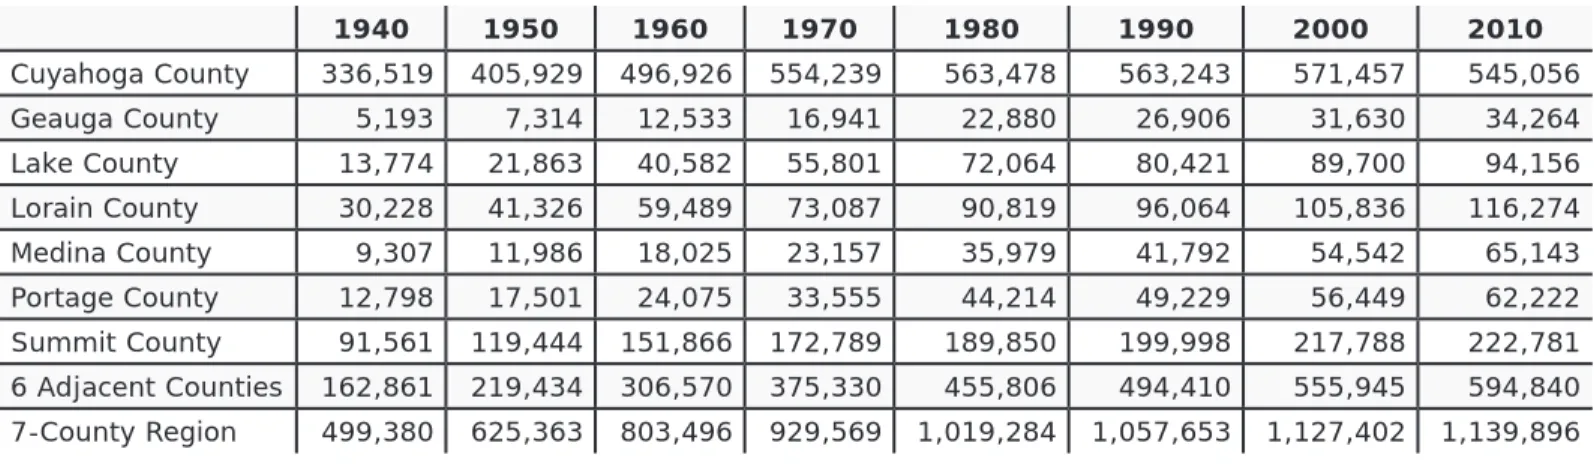 Table 9 Number of Households by Decade, 1940-2010, Cleveland-Akron Seven-County Region